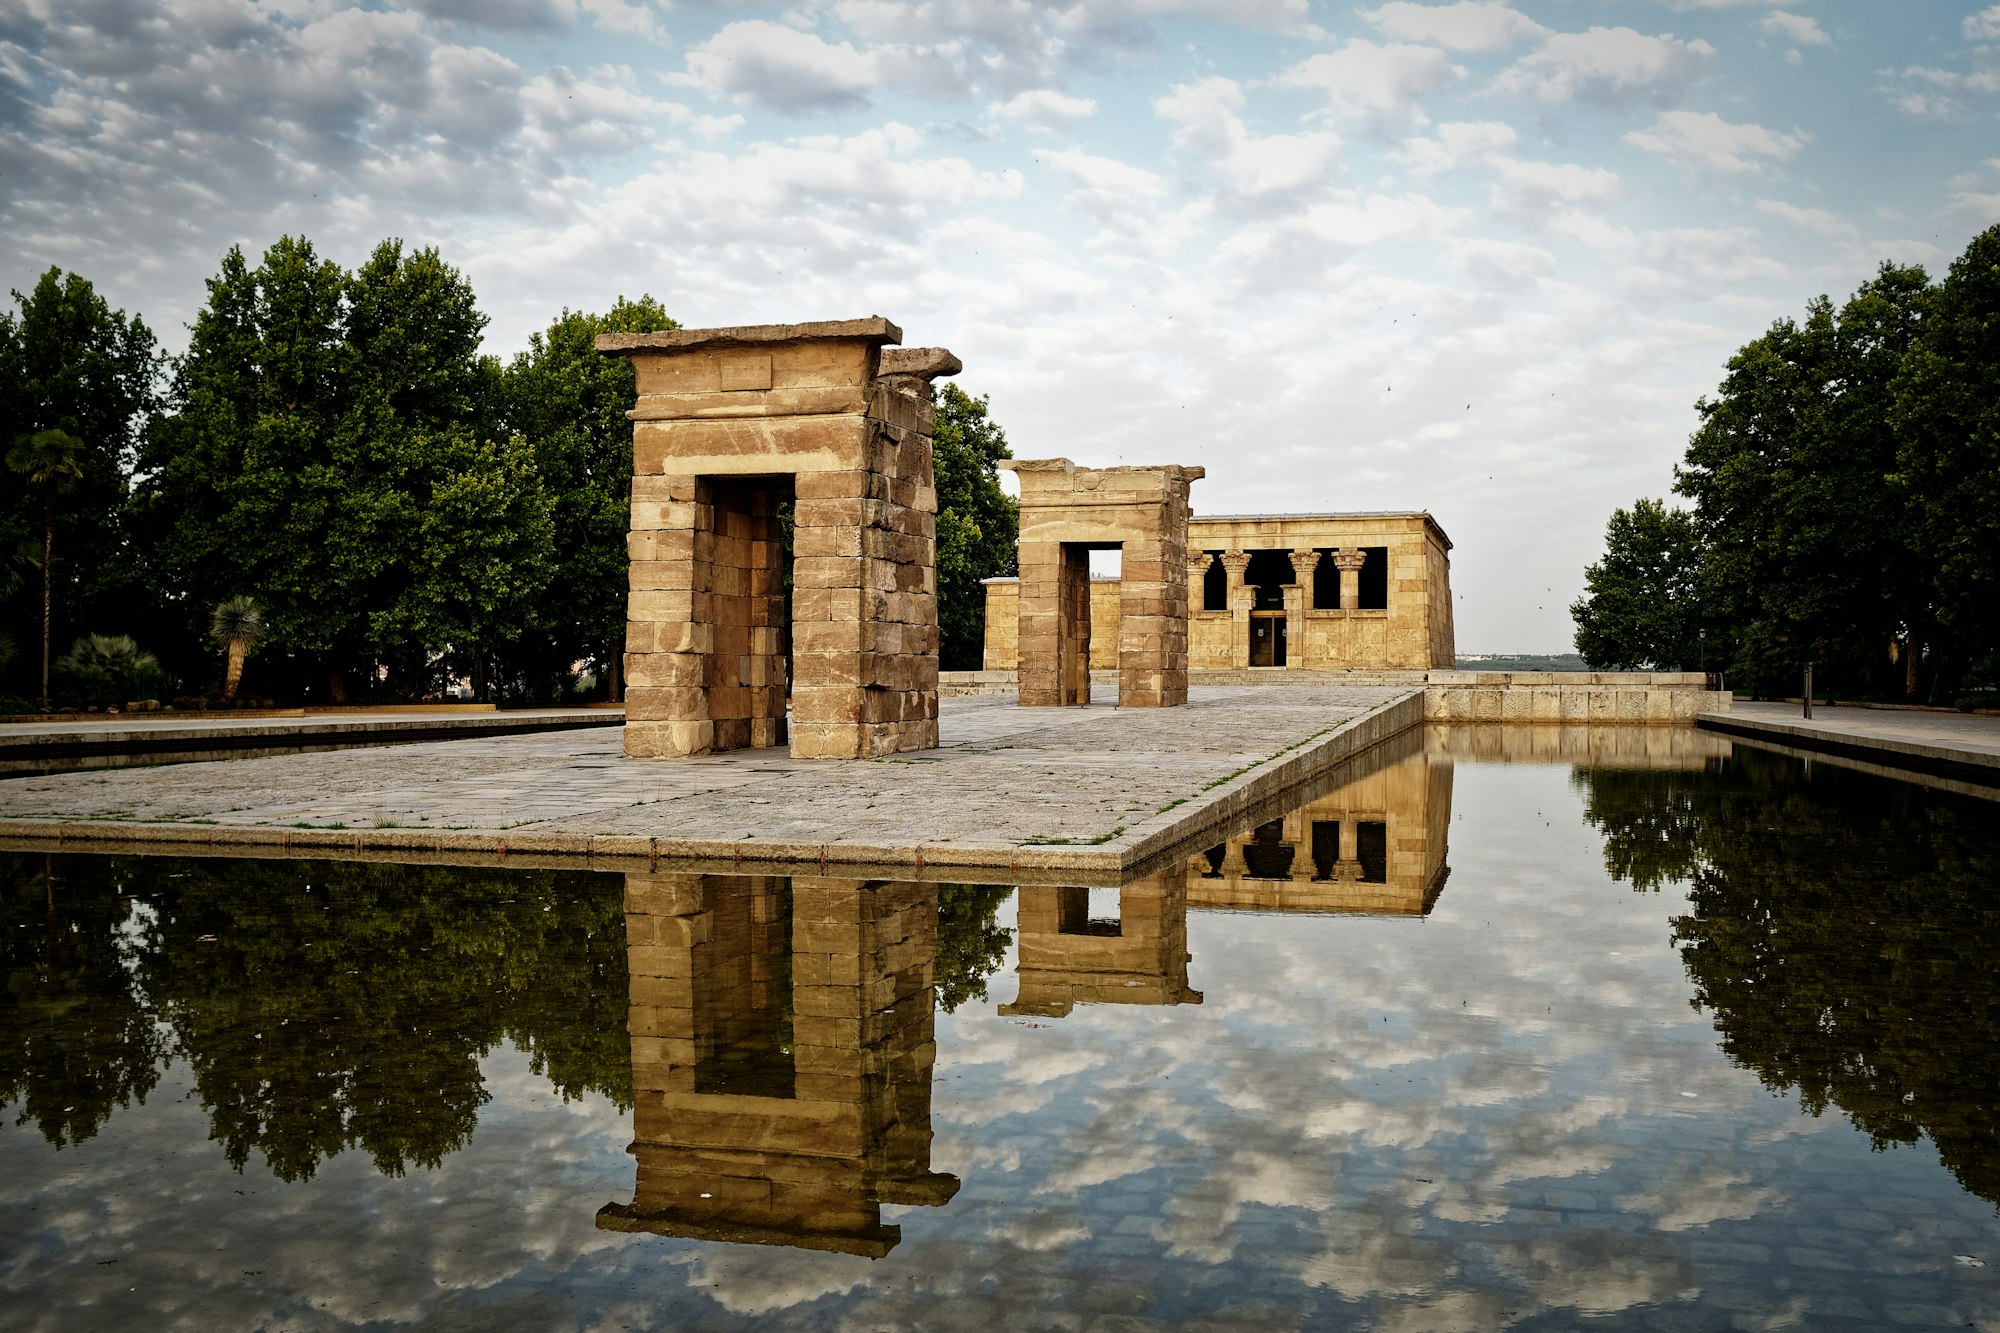 Debod Egyptian temple in Madrid, Spain with clouds reflected in the pond